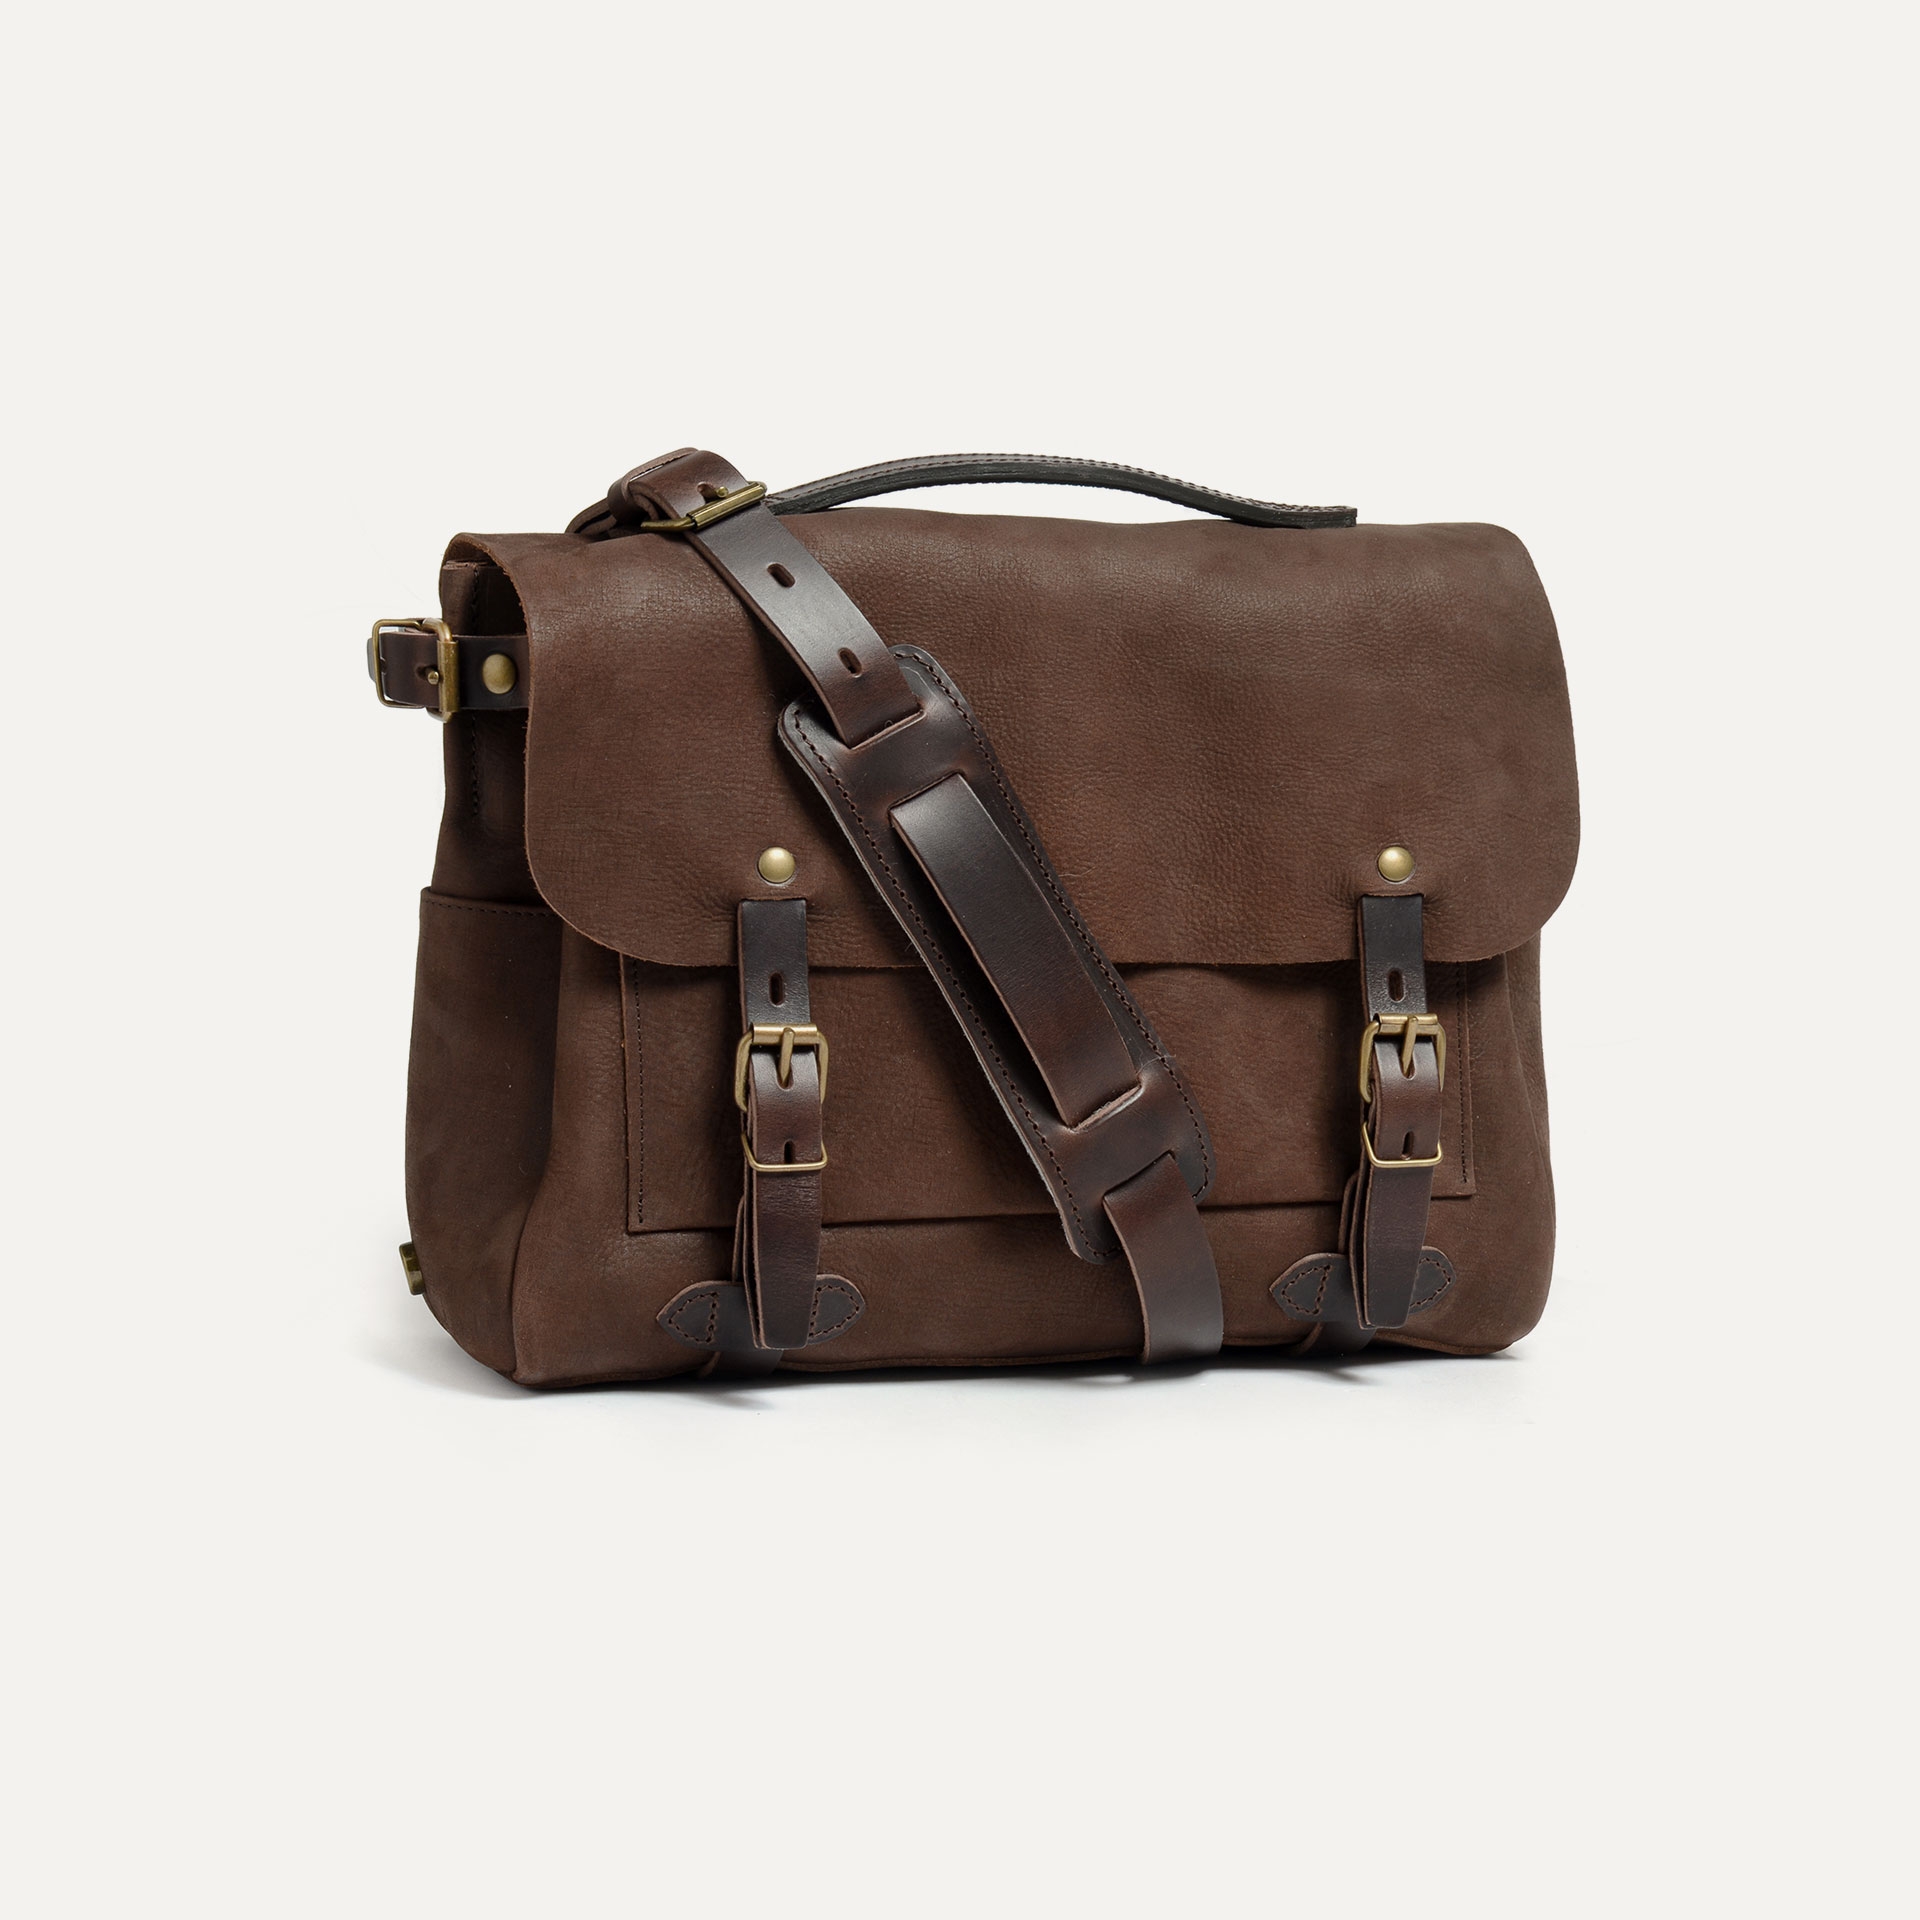 Postman bag Éclair S - Coffee / Waxed Leather - Messenger bag - Made in ...